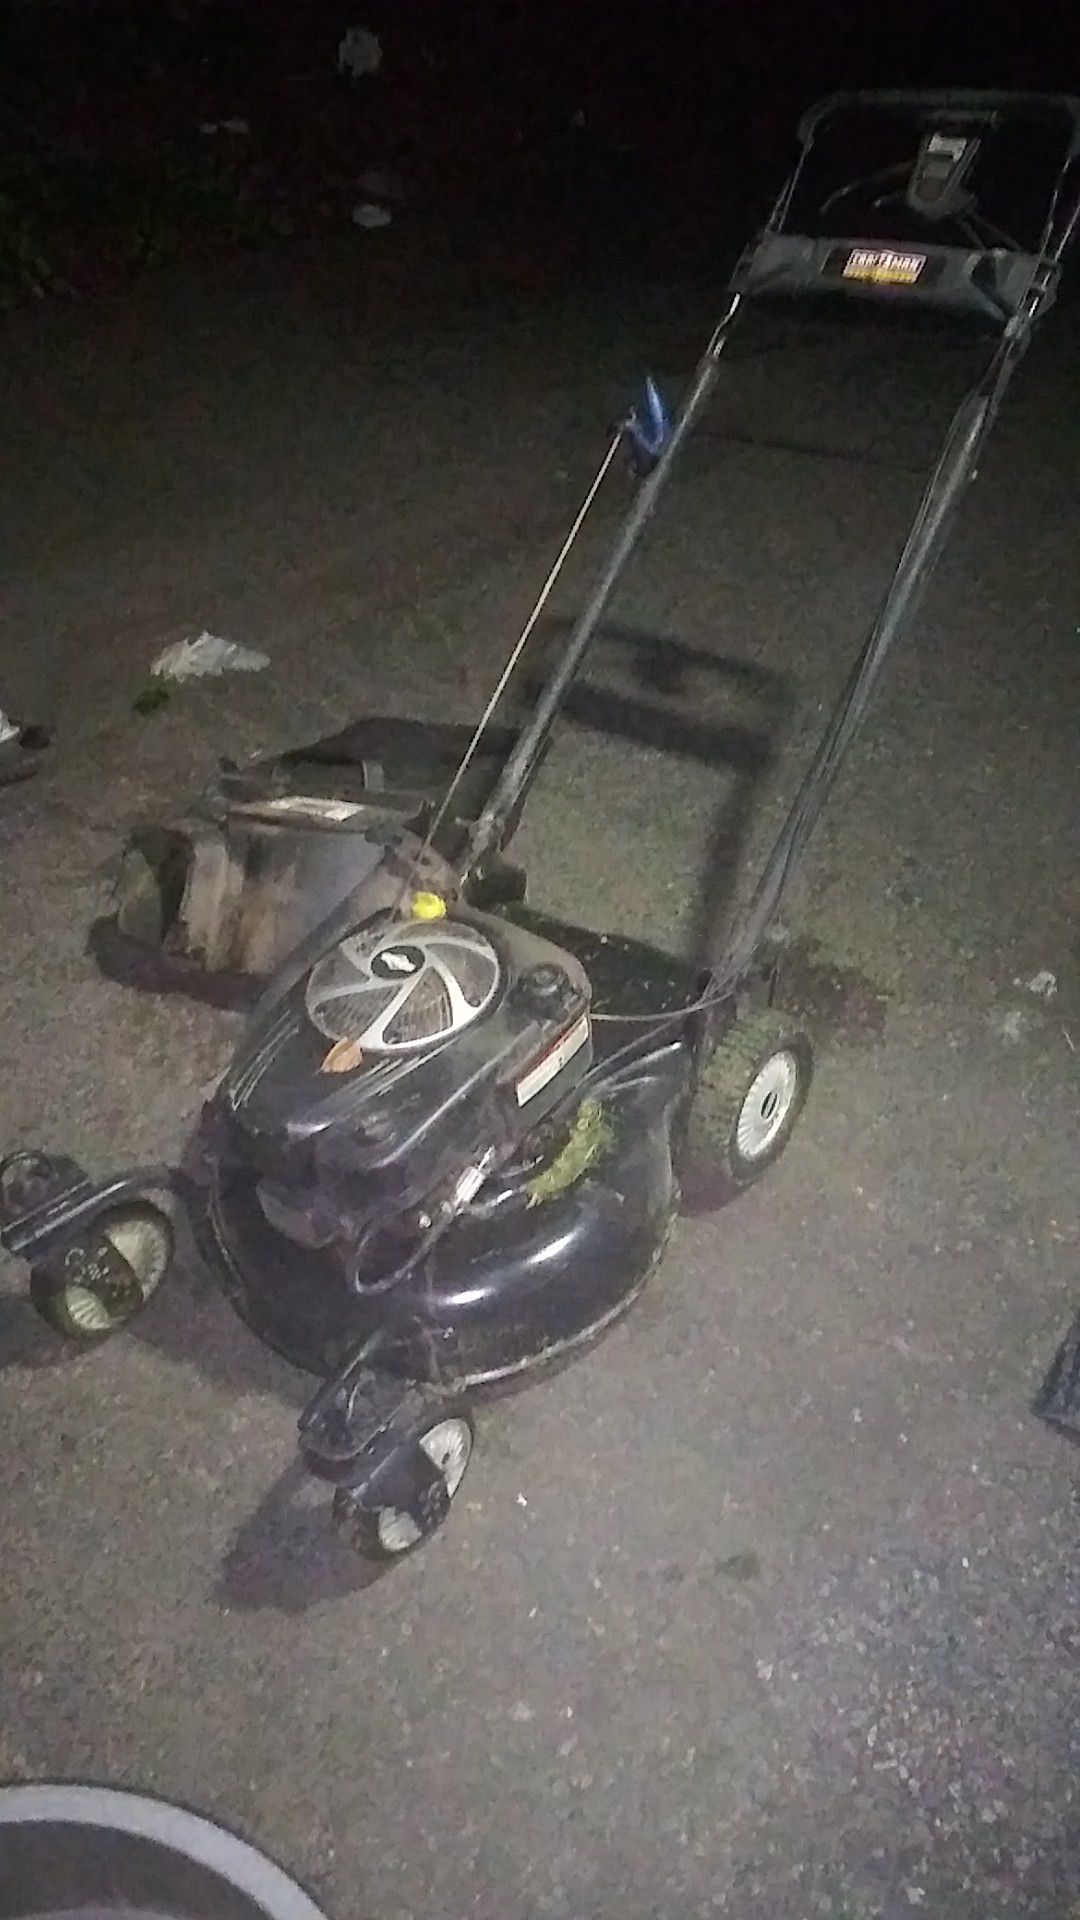 It's a Craftsman Pro 8.75 horsepower commercial lawn mower